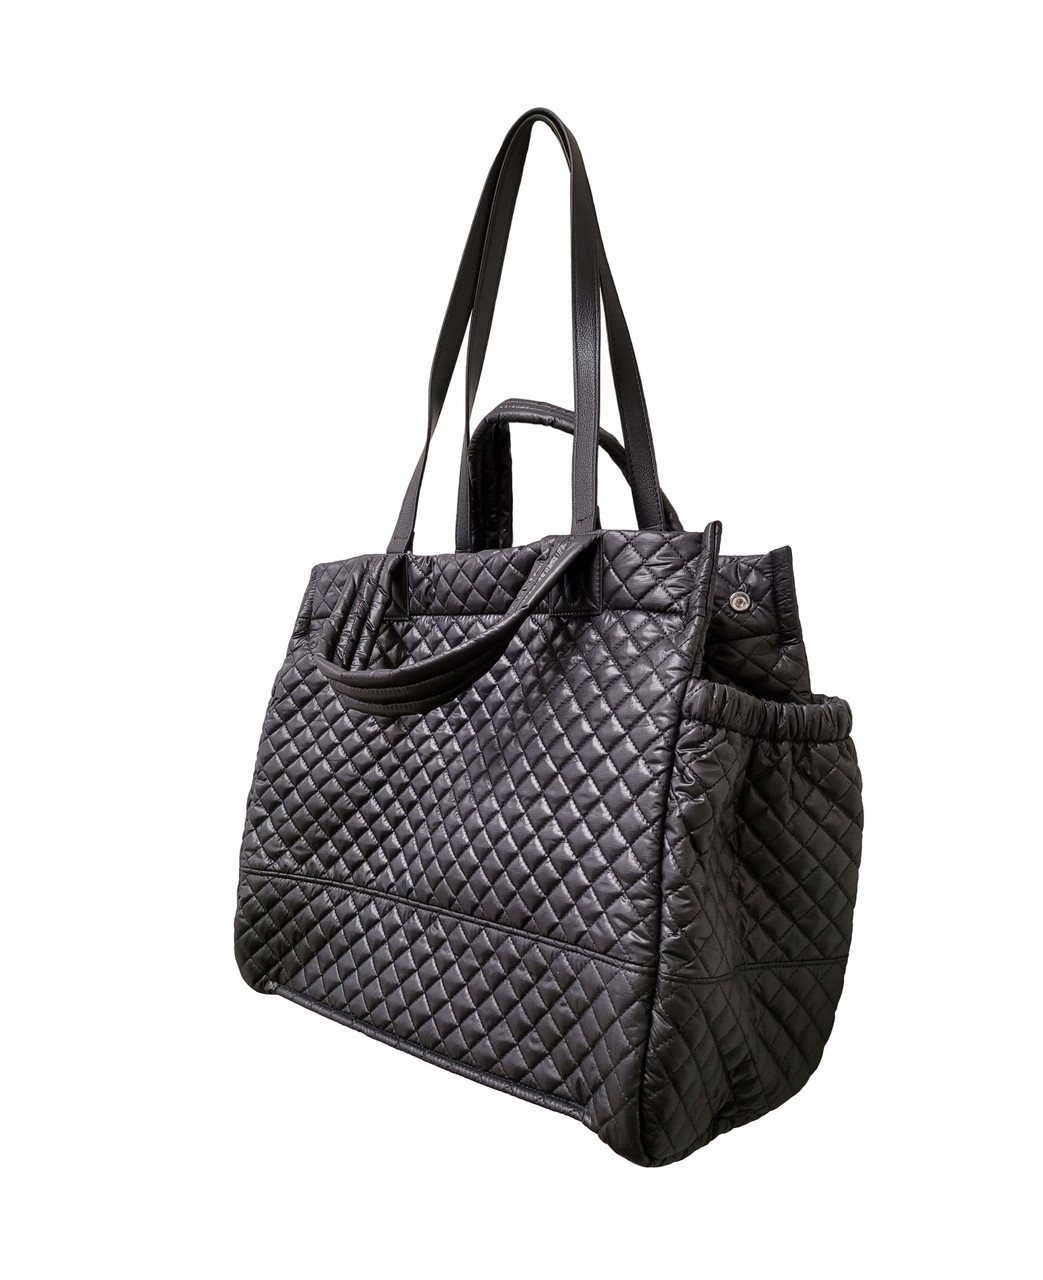  GBLQ PLUS Women Tote Bag, Large Quilted Shoulder